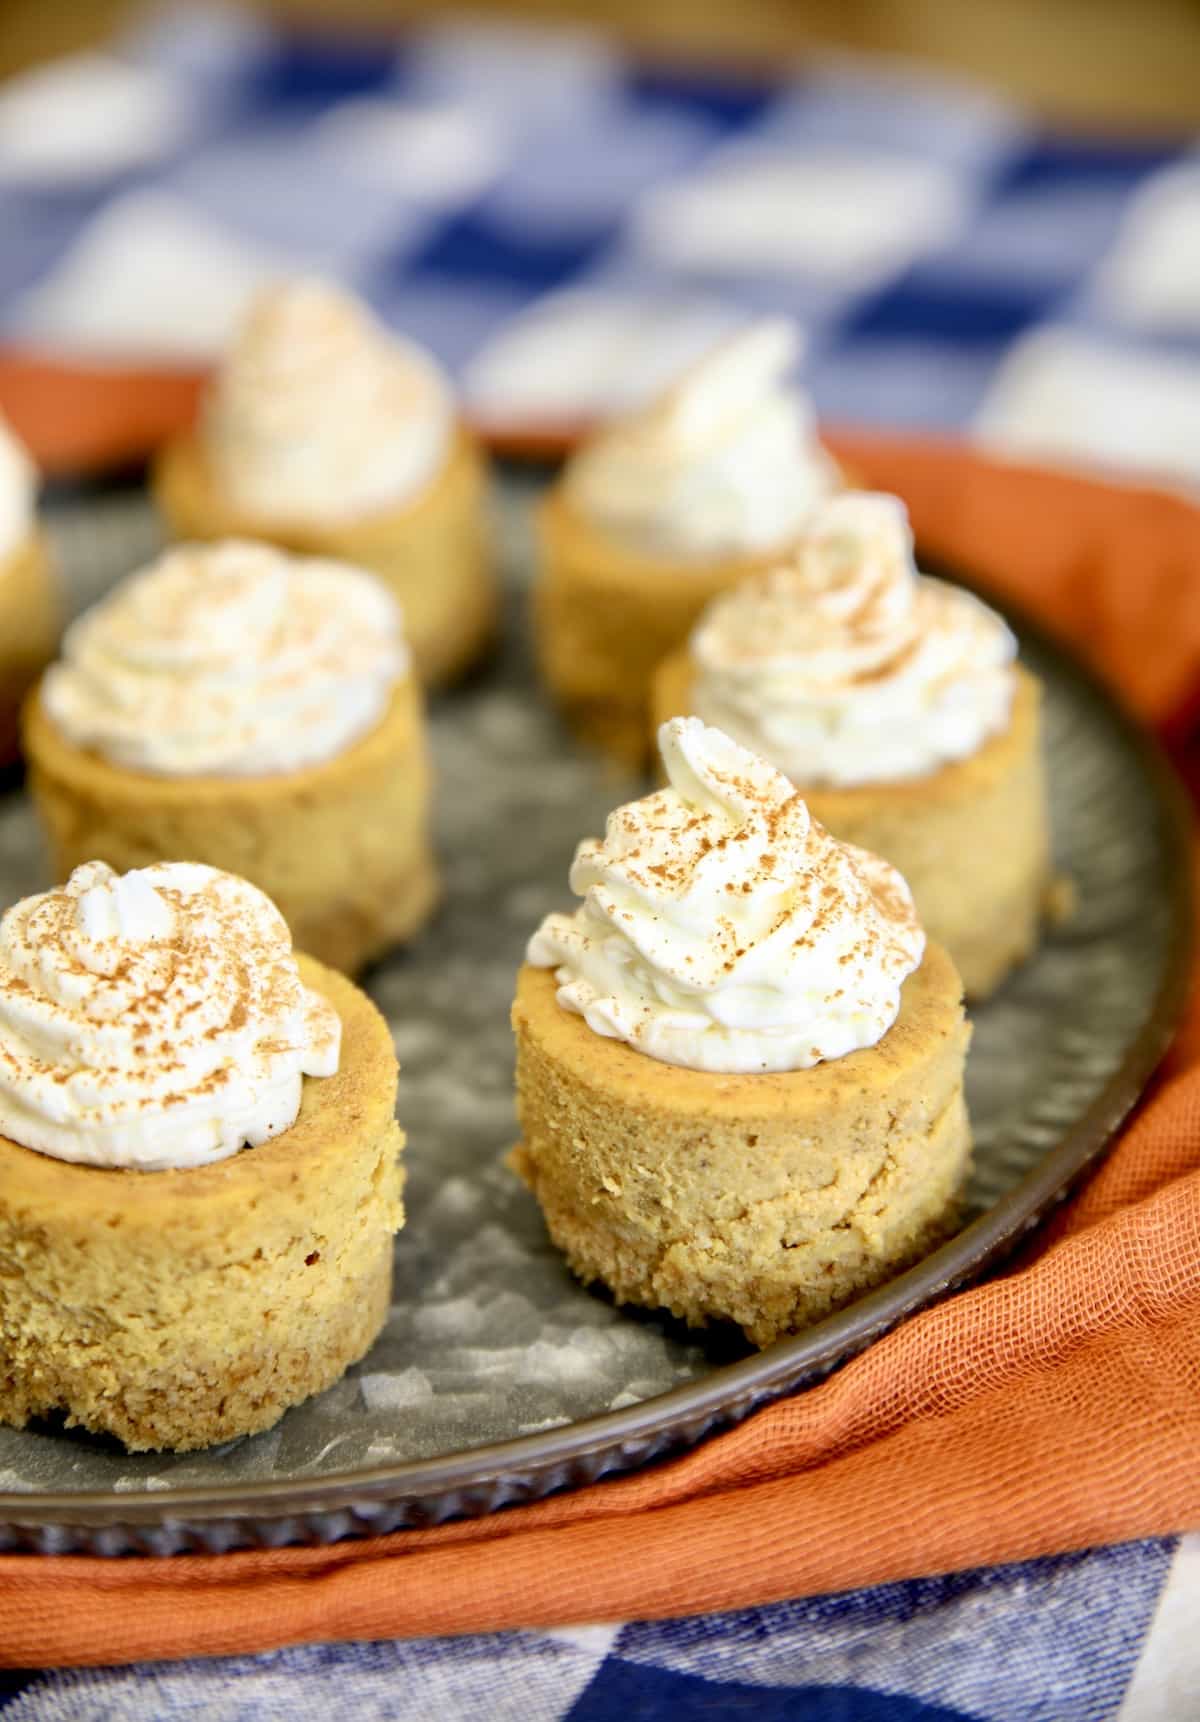 Tray of mini pumpkin cheesecakes with whipped cream.